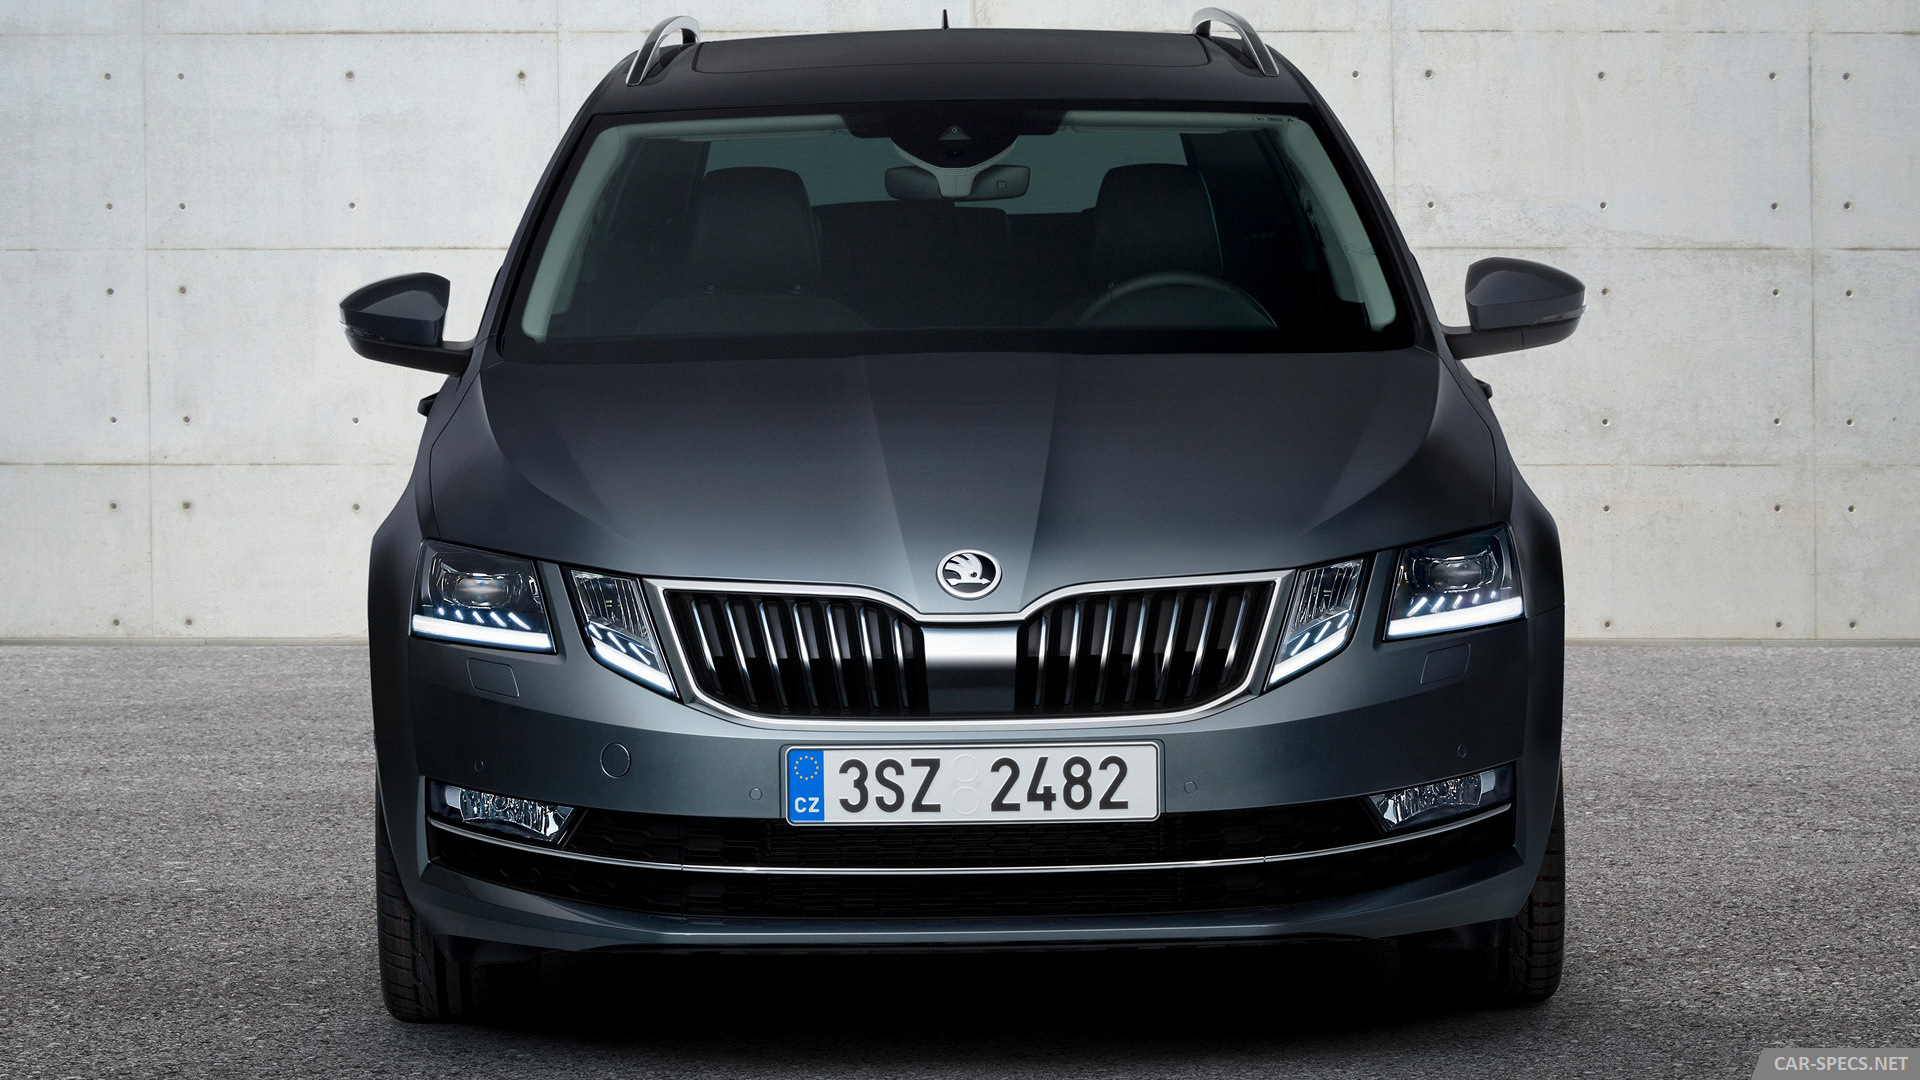 Skoda Octavia (2017) RS 2.0 TSI (245 Hp) DSG Technical Car Specifications,  Engine Info, Performance Data and Stats